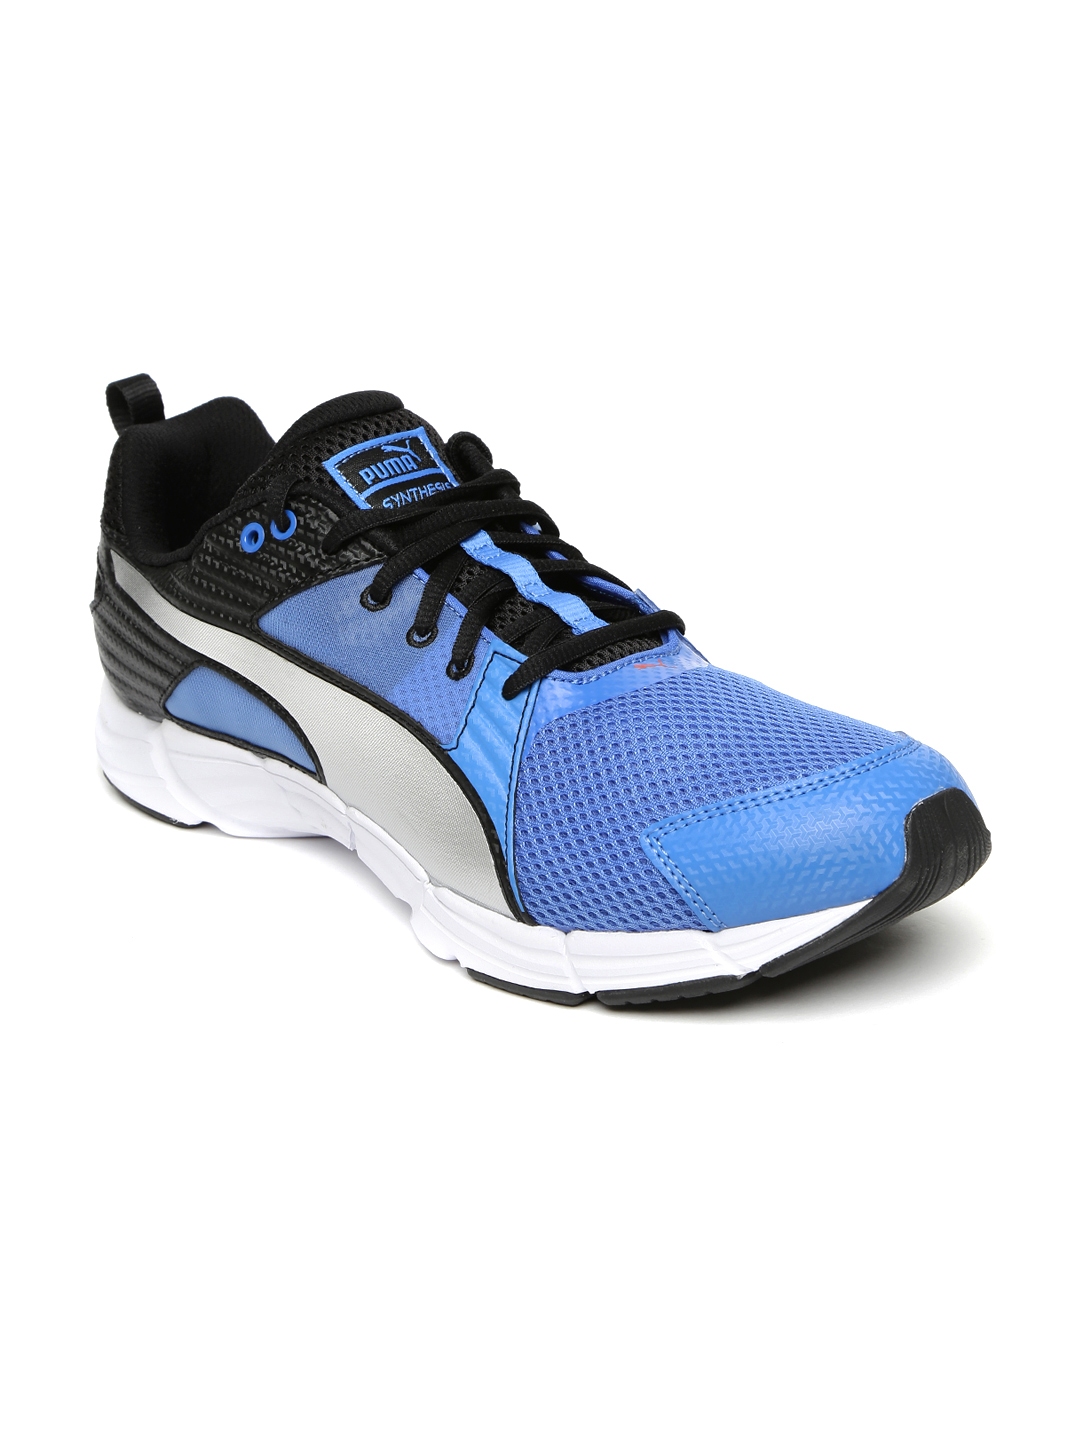 Buy PUMA Men Blue & Black Synthesis Running Shoes - Sports Shoes for ...